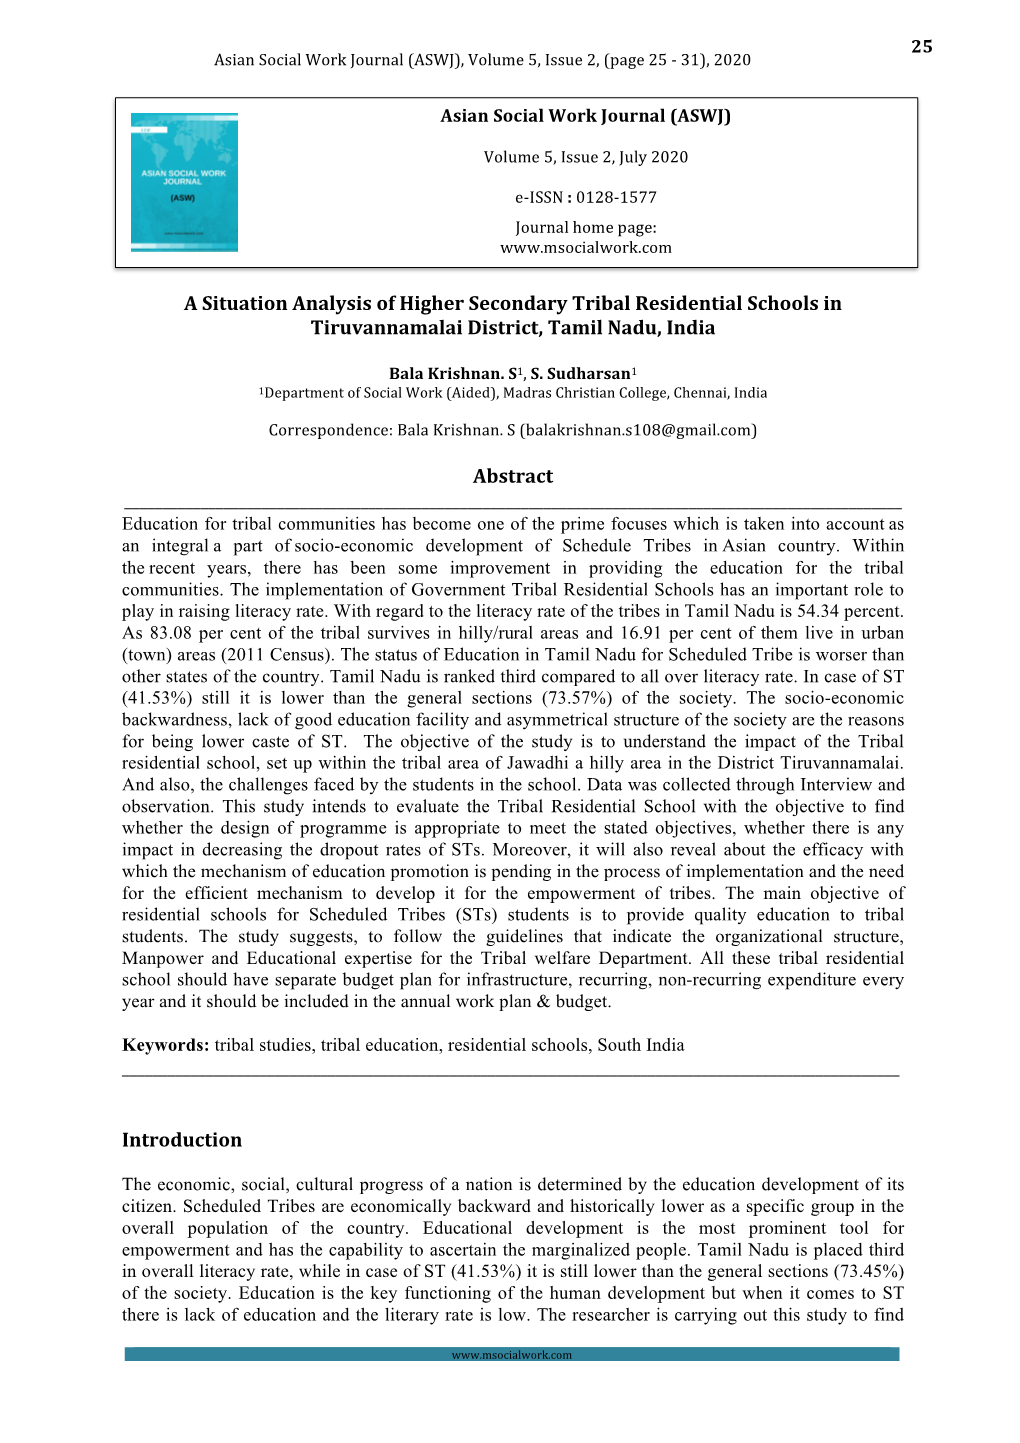 A Situation Analysis of Higher Secondary Tribal Residential Schools in Tiruvannamalai District, Tamil Nadu, India